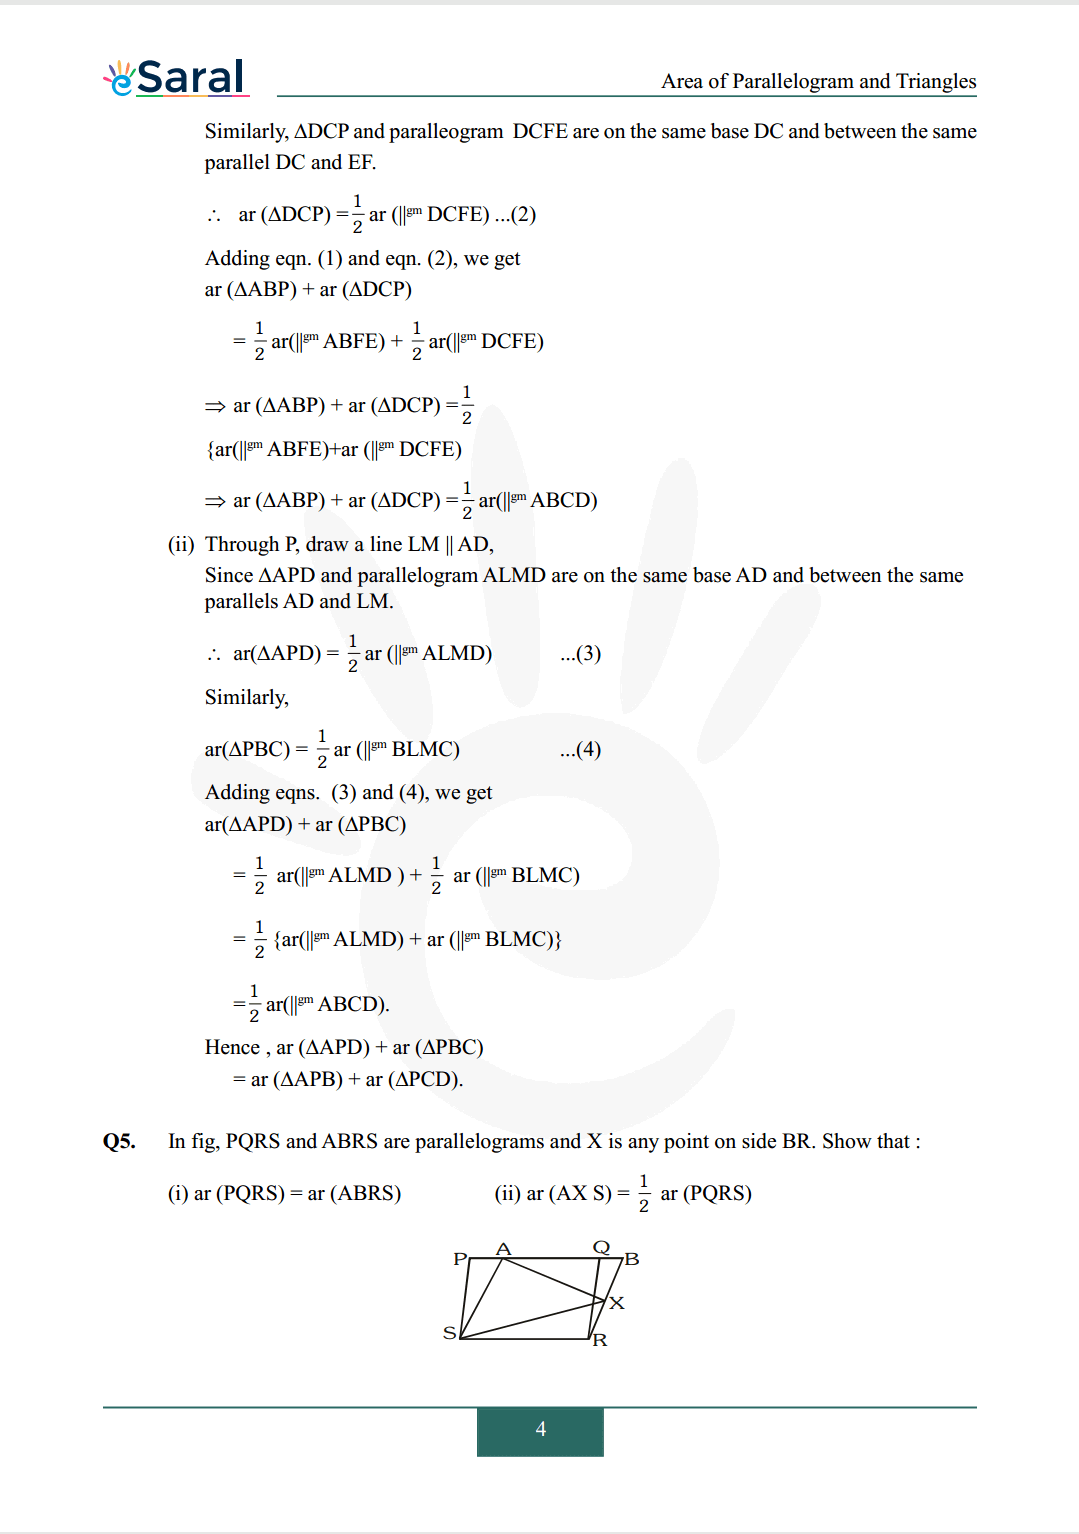 Class 9 maths chapter 9 exercise 9.2 solutions Image 3